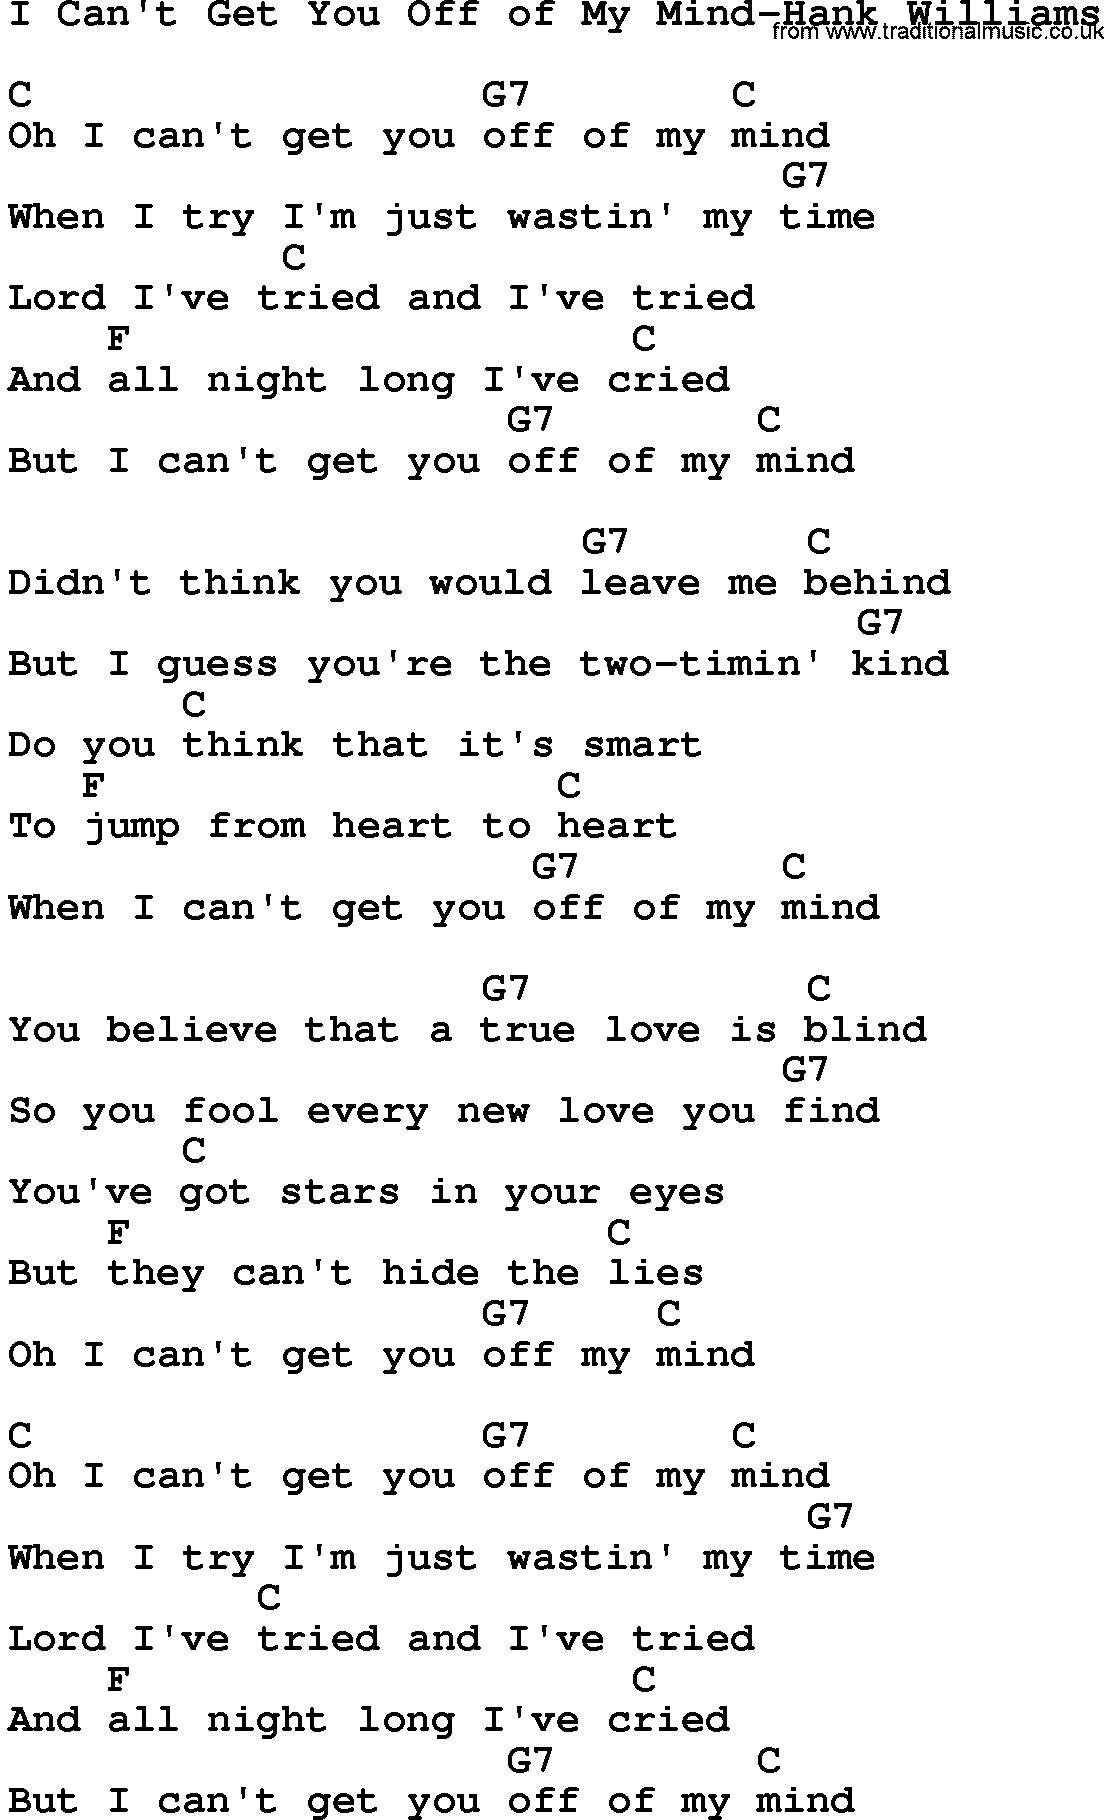 Country music song: I Can't Get You Off Of My Mind-Hank Williams lyrics and chords